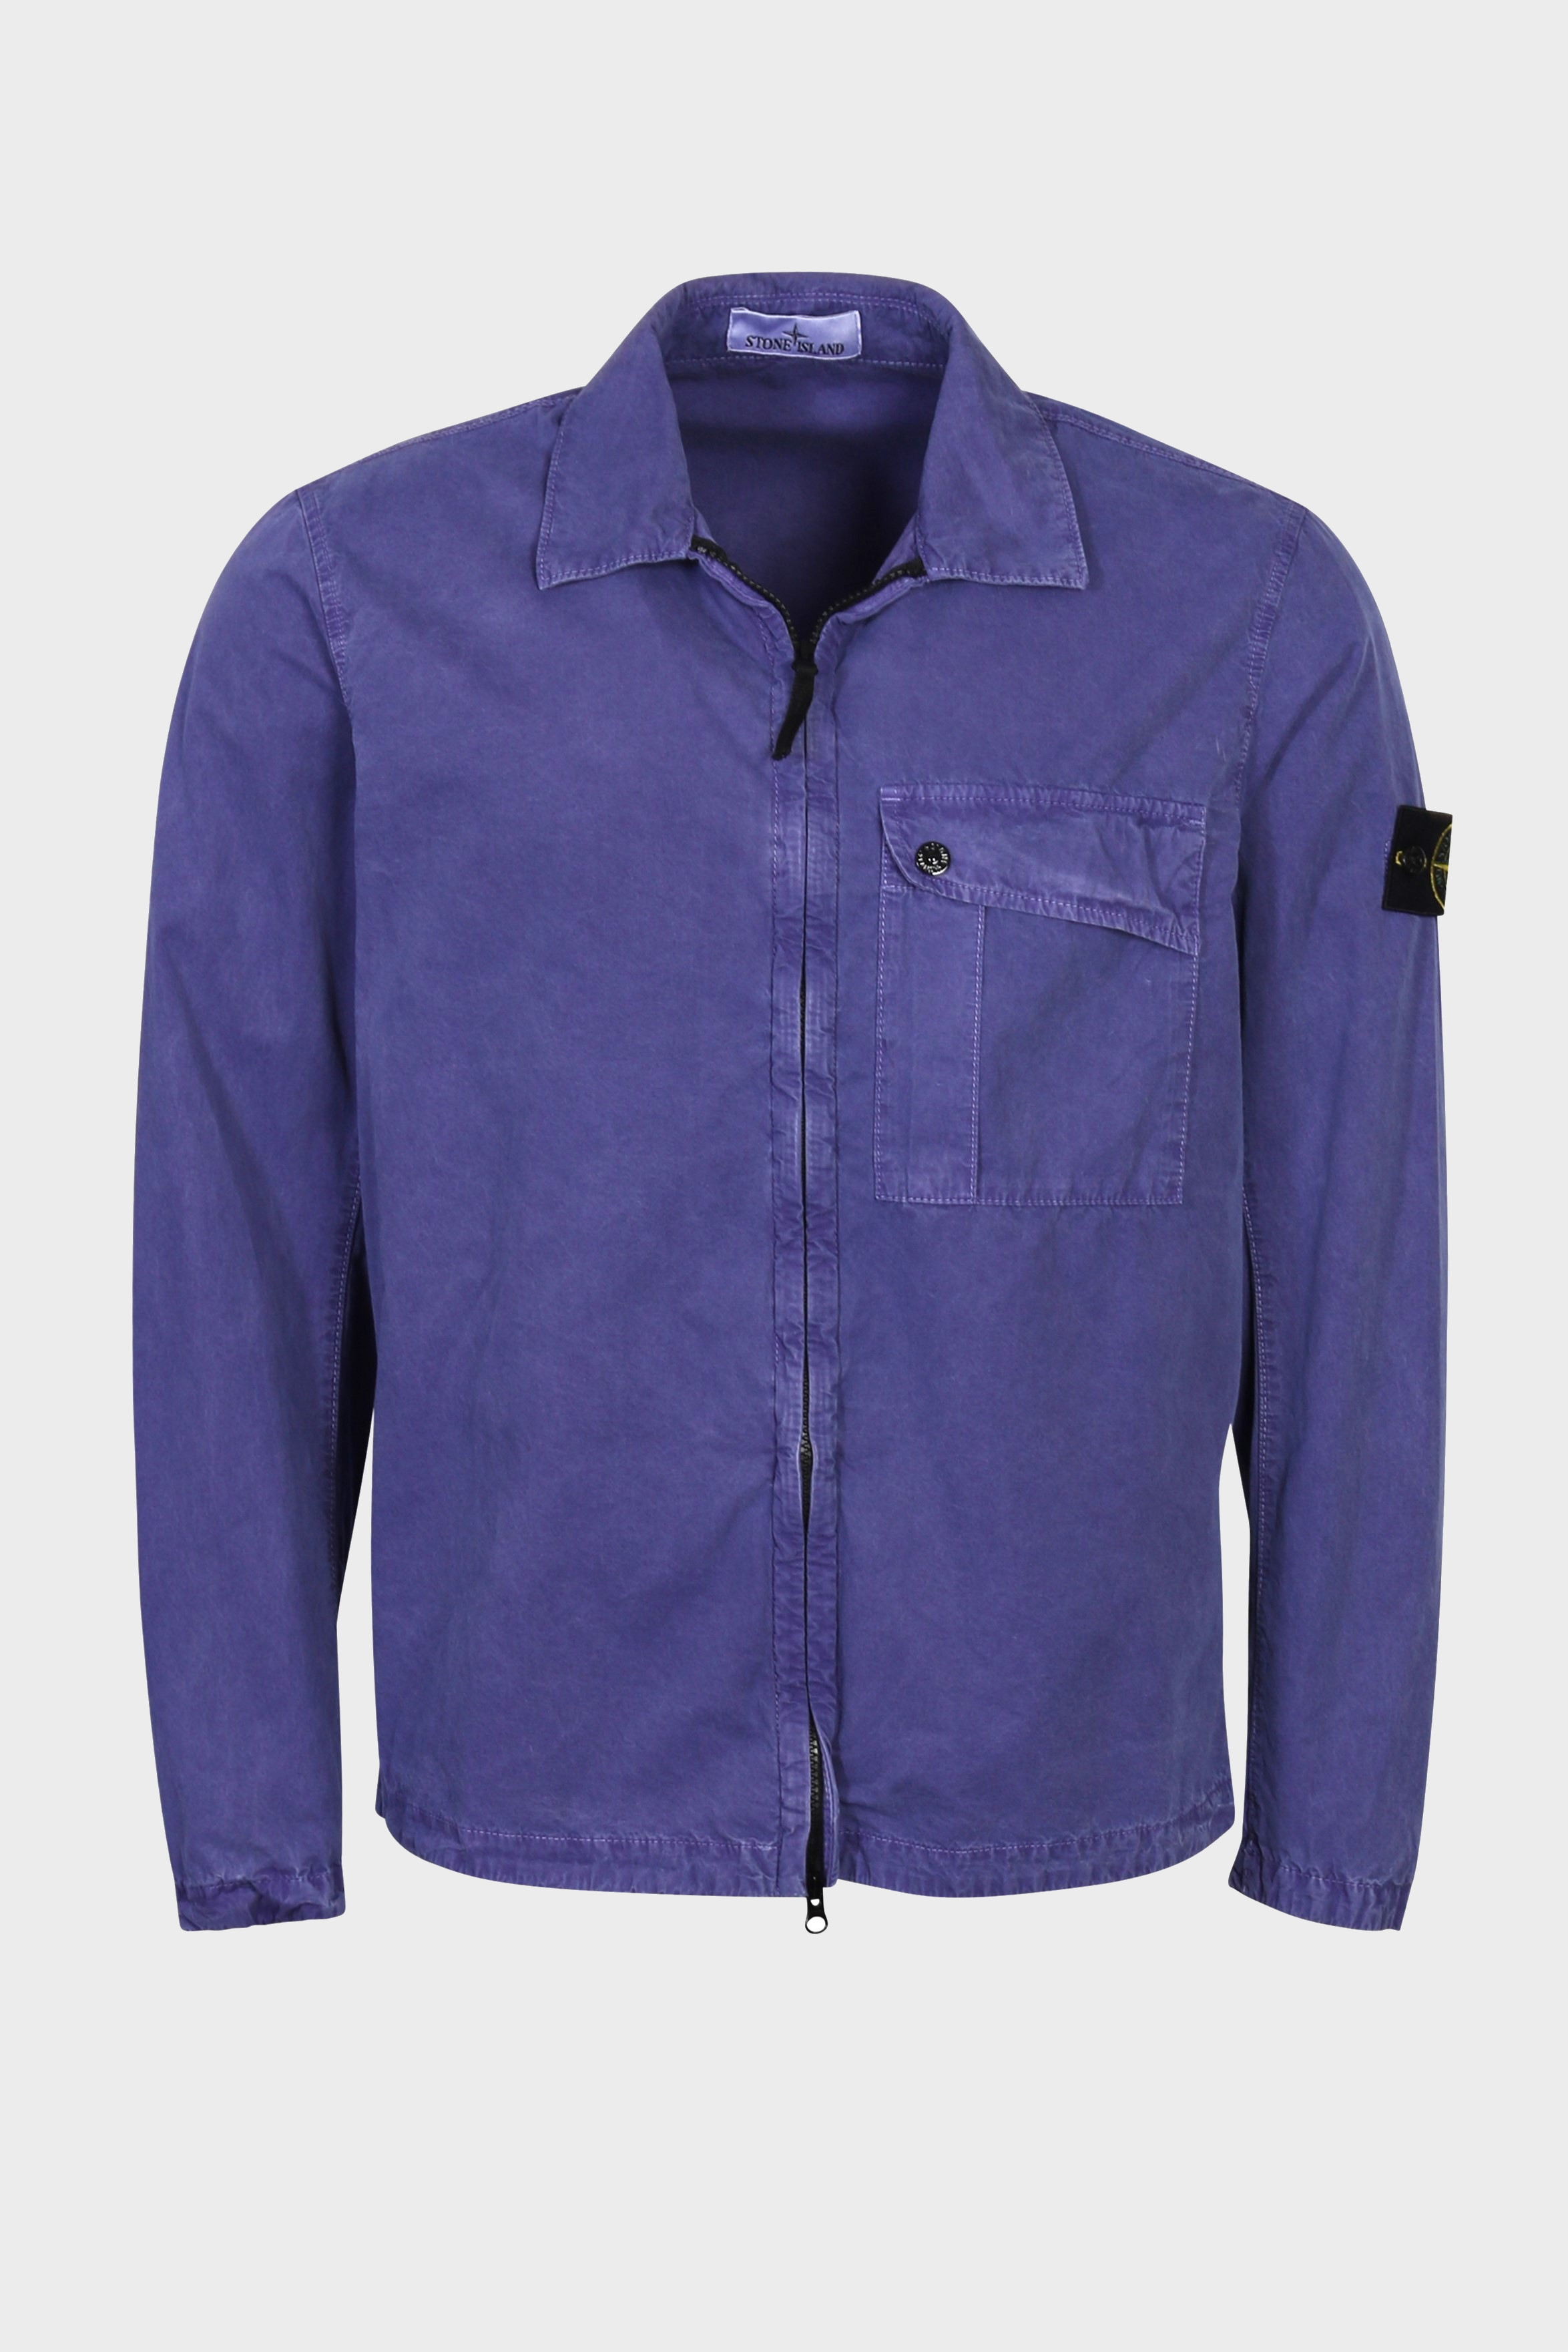 STONE ISLAND Overshirt in Washed Lilac XL